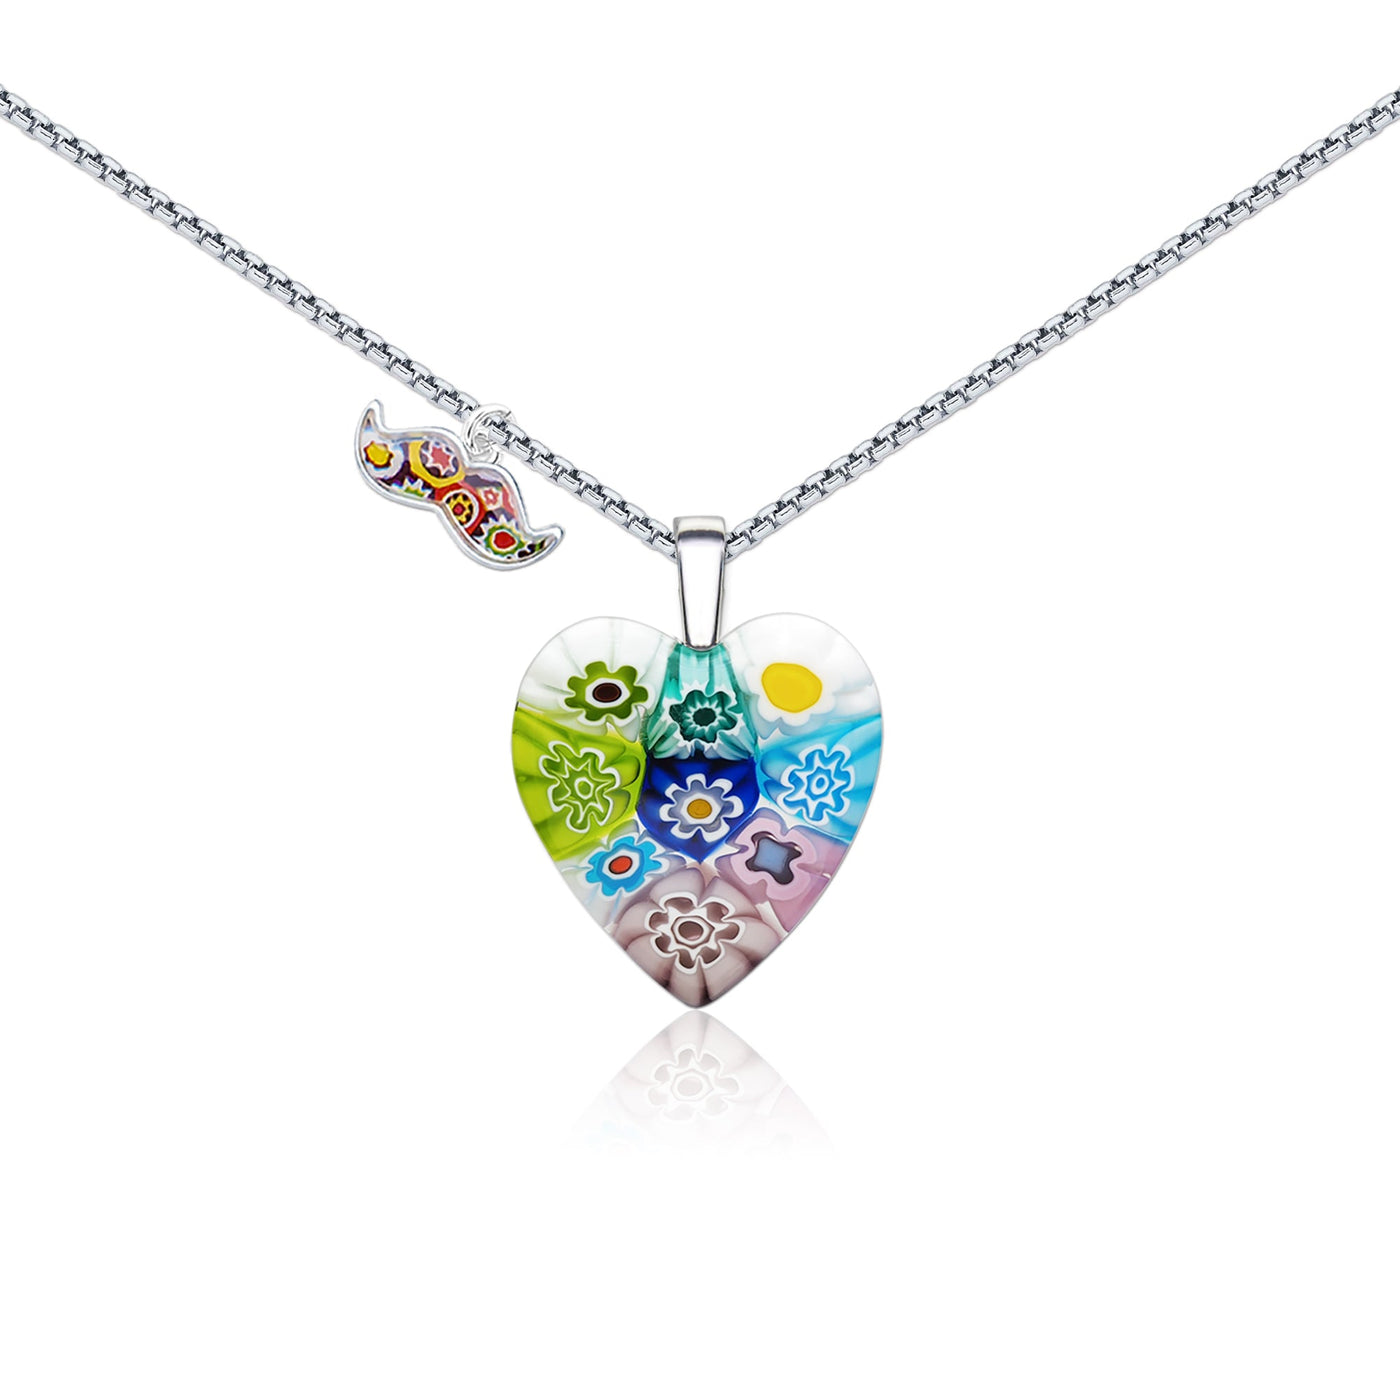 Nine in Bloom Heart Necklace - 1.2mm 925 Sterling Silver - Pendant Necklace